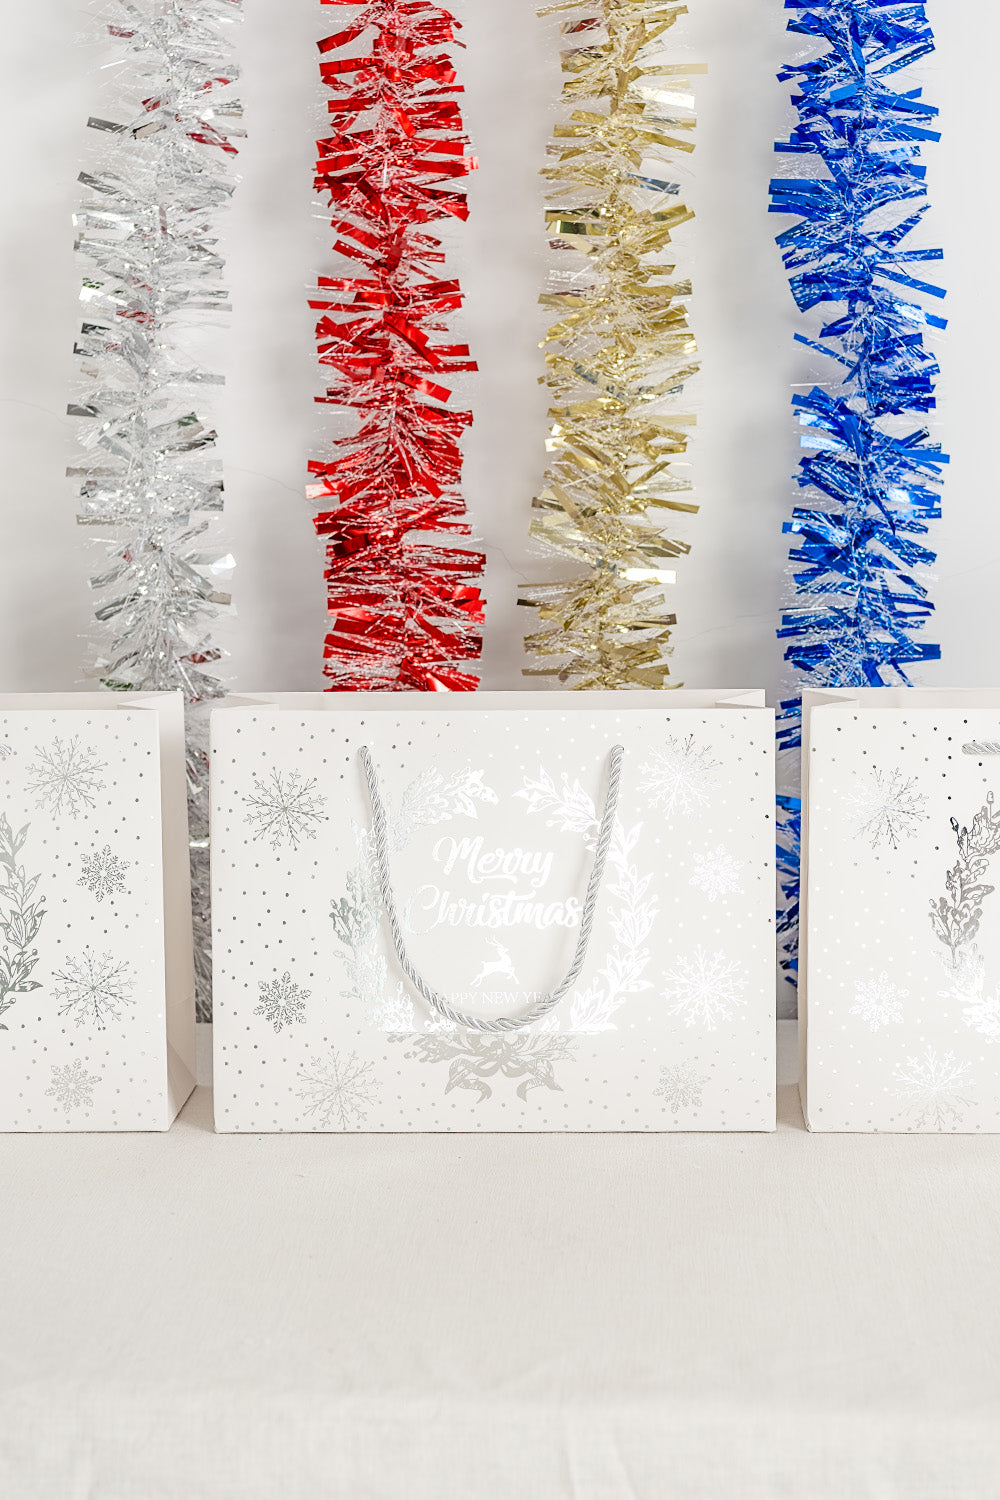 Crisky Merry Christmas & Happy New Year Gift Bags, Foil Silver, 11" x 8" x 4", Medium Bags 12 Pcs